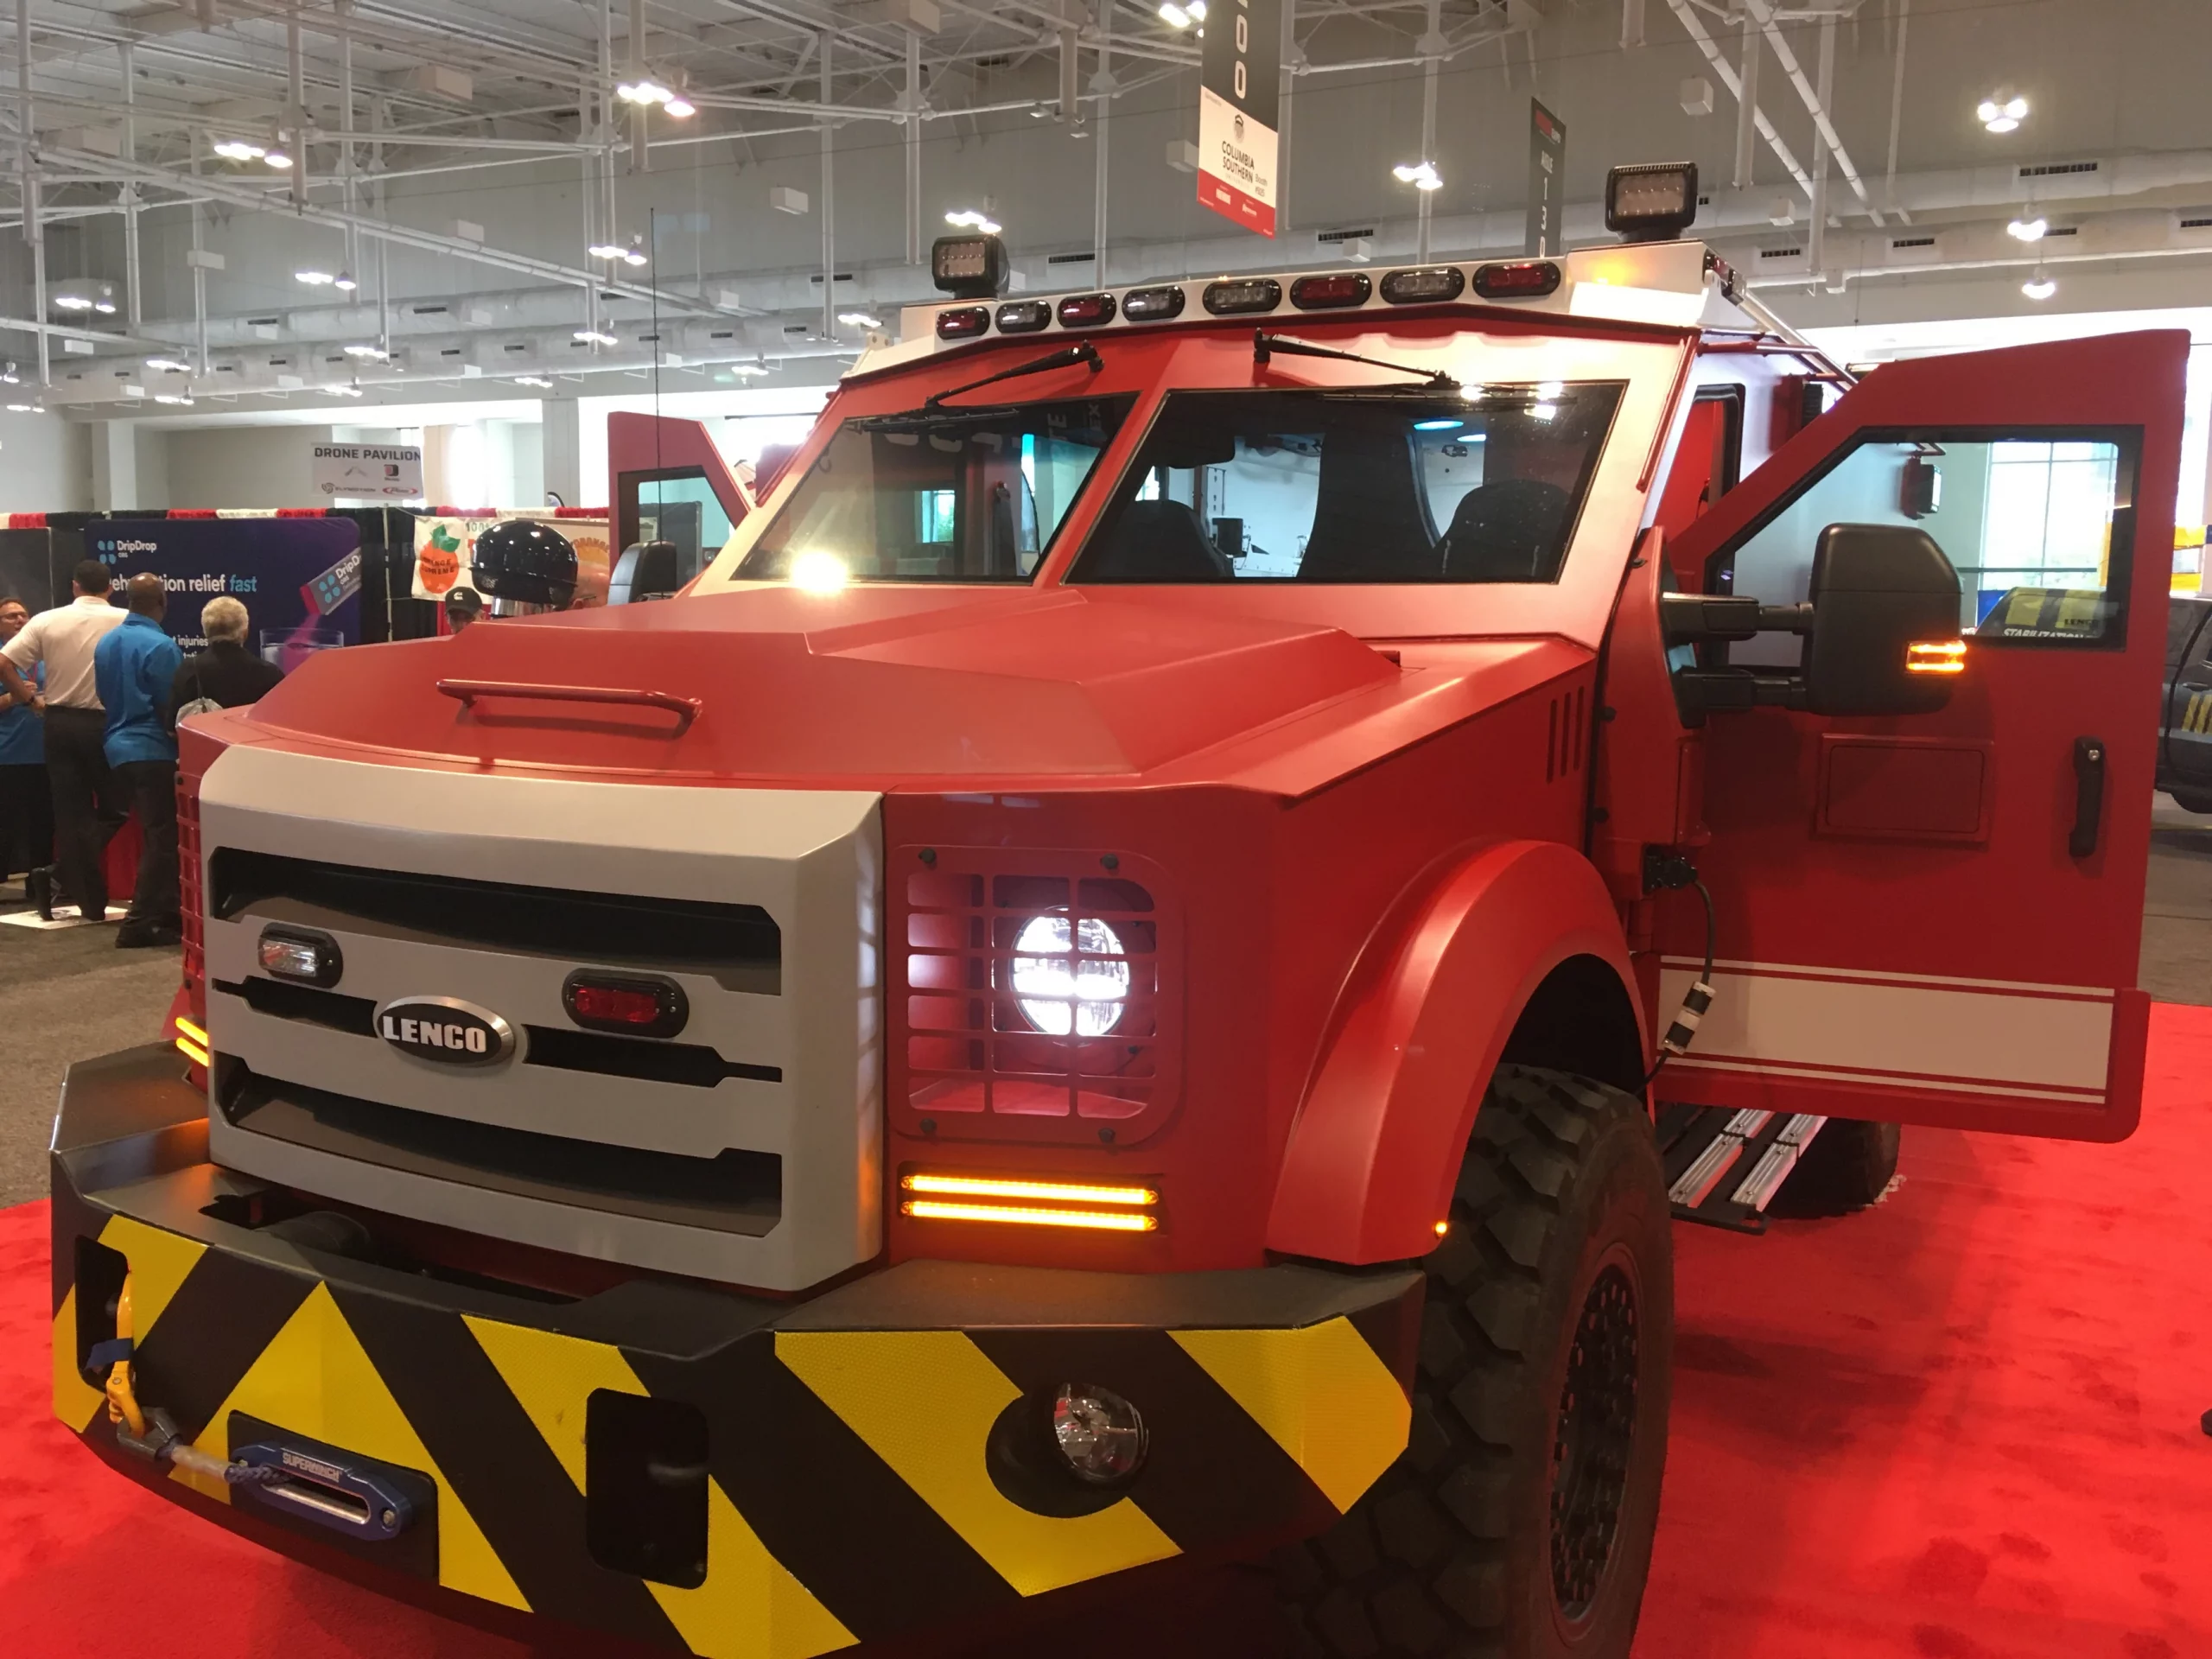 A Lenco fire truck is on display at the Firehouse Expo 2019.